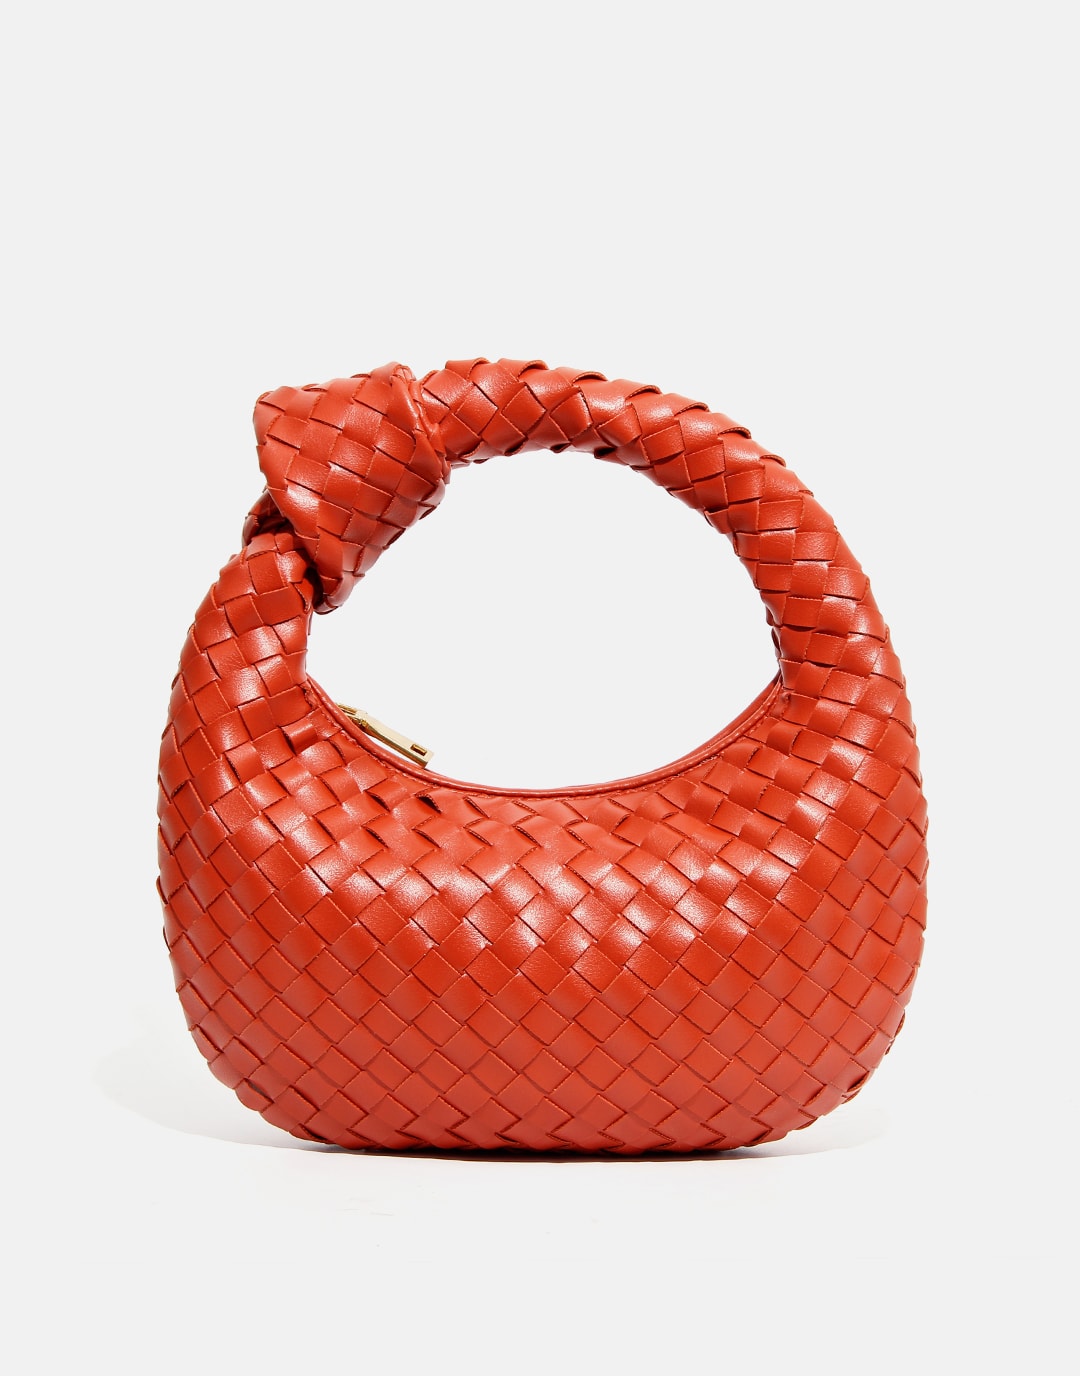 Handmade Women's Leather Woven Pattern Daily Bag